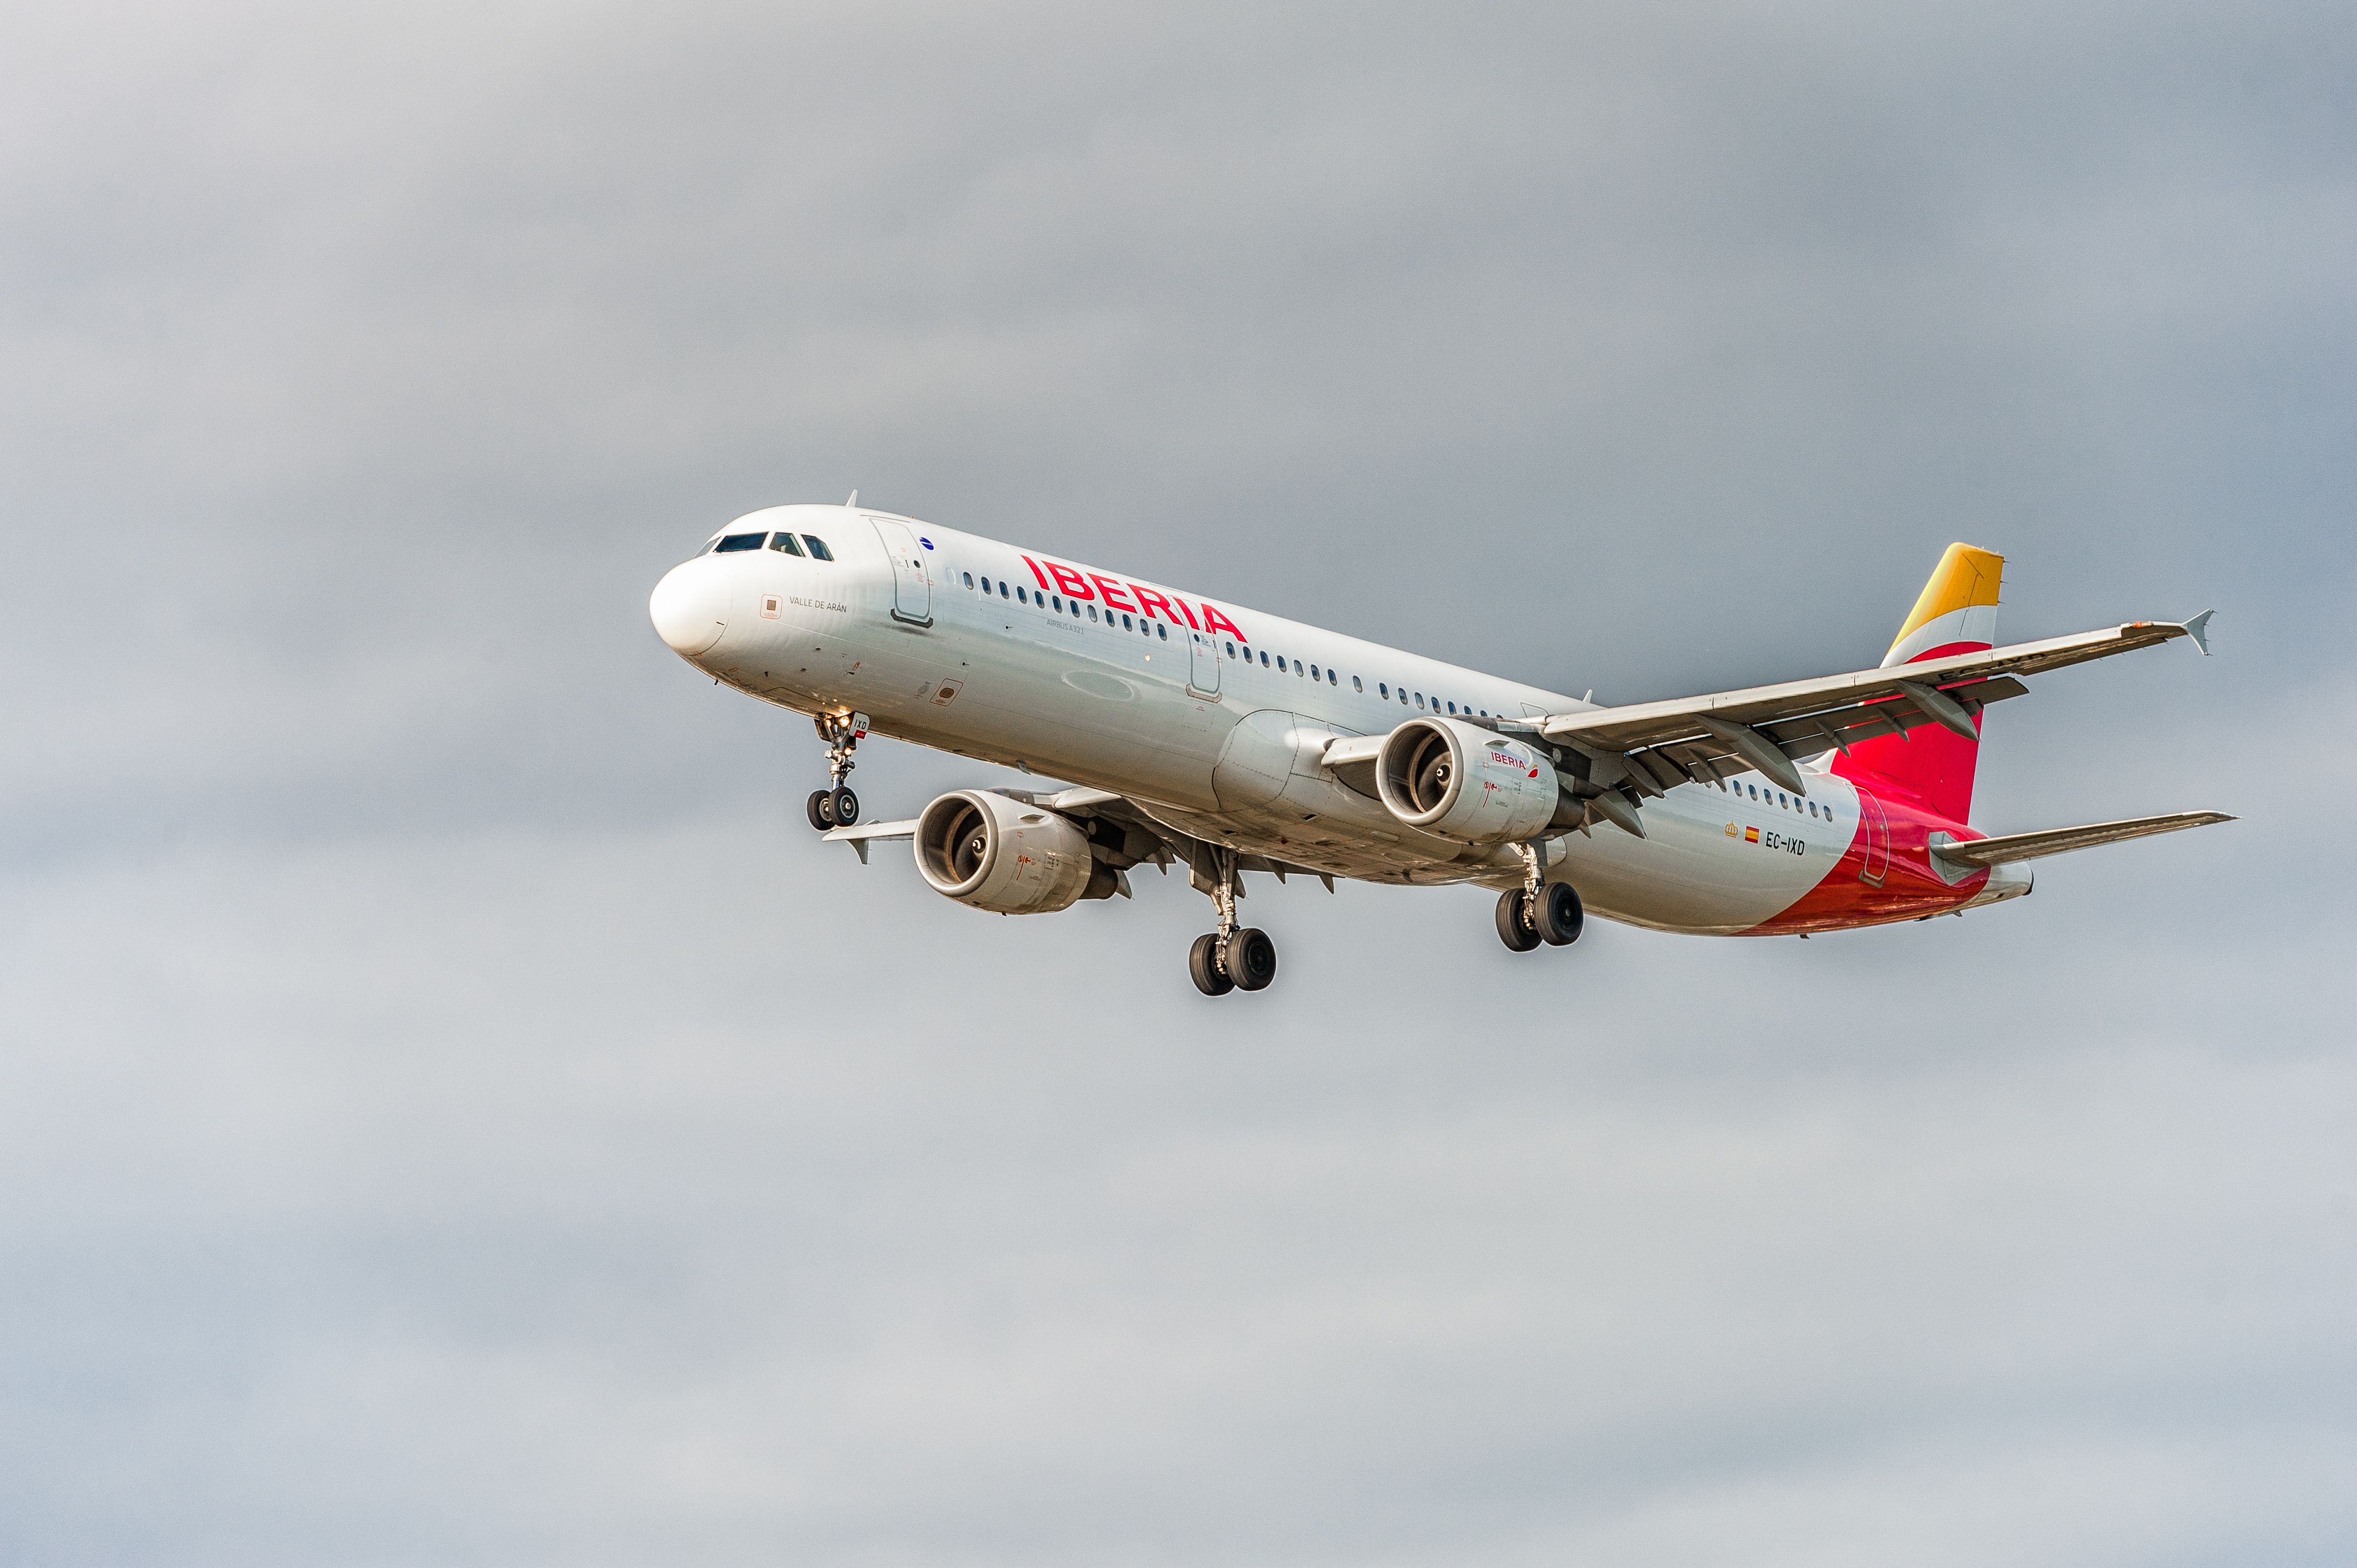 An Iberia Airbus 321 about to land.